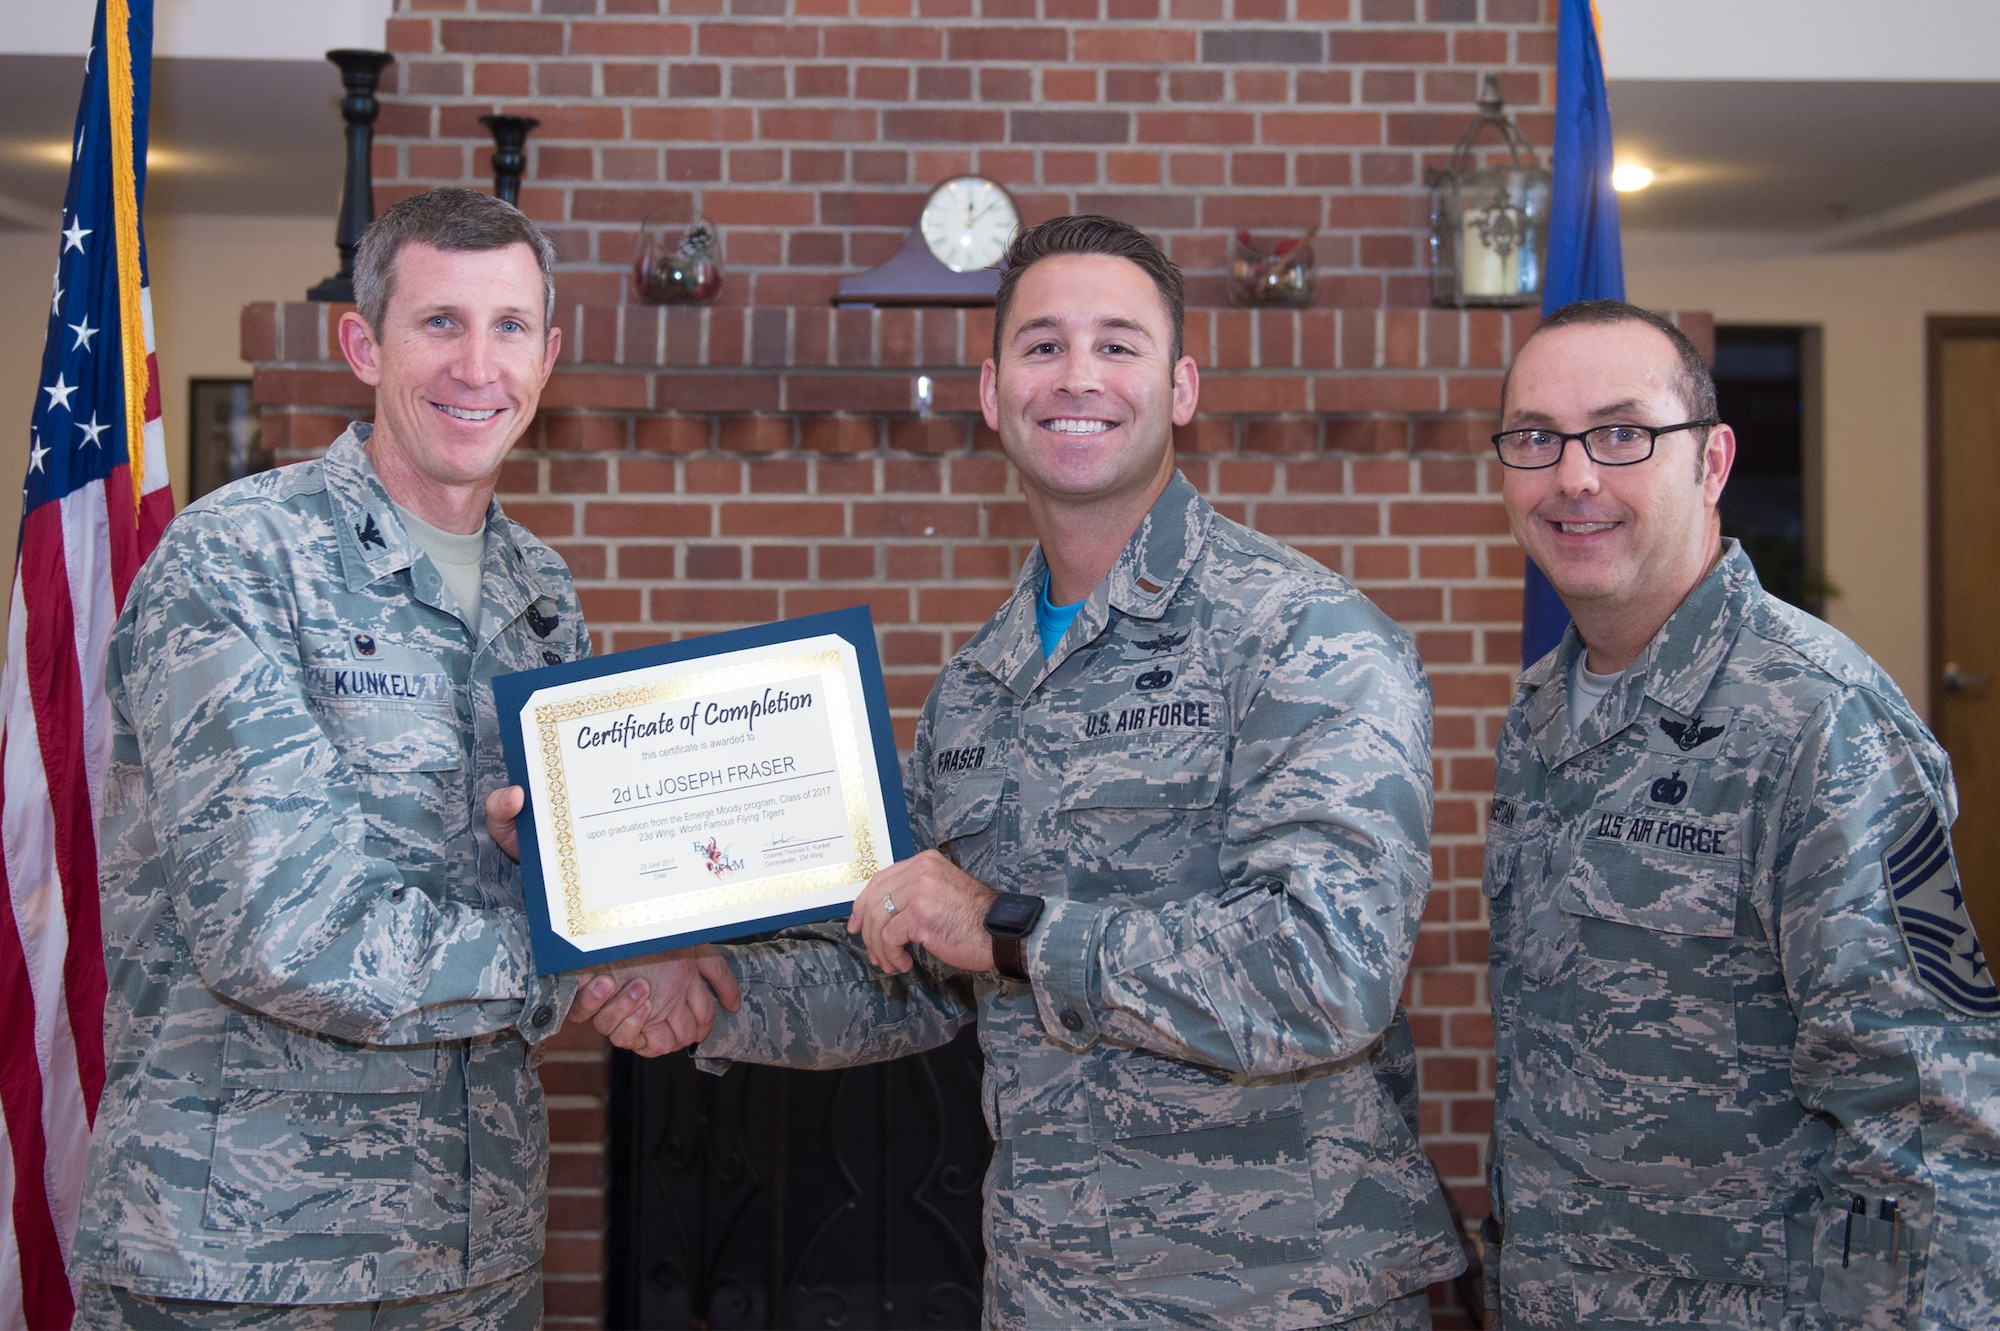 Col. Thomas Kunkel, 23d Wing commander, presents a certificate to 2nd Lt. Joseph Fraser, 23d Communications Squadron officer in charge of plans and programs, during the 2017 Emerge Moody, Leadership Moody graduation ceremony, June 23, 2017, at Moody Air Force Base, Ga. Approximately 30 distinguished Airmen accepted honors during the event. During the nine-month program, Emerge Moody students broadened their view of how they fit into the overall Moody and larger Air Force mission, while Leadership Moody students learned local community agencies' best practices and challenges of leaders from non-military perspectives. (U.S. Air Force photo by Senior Airman Greg Nash)